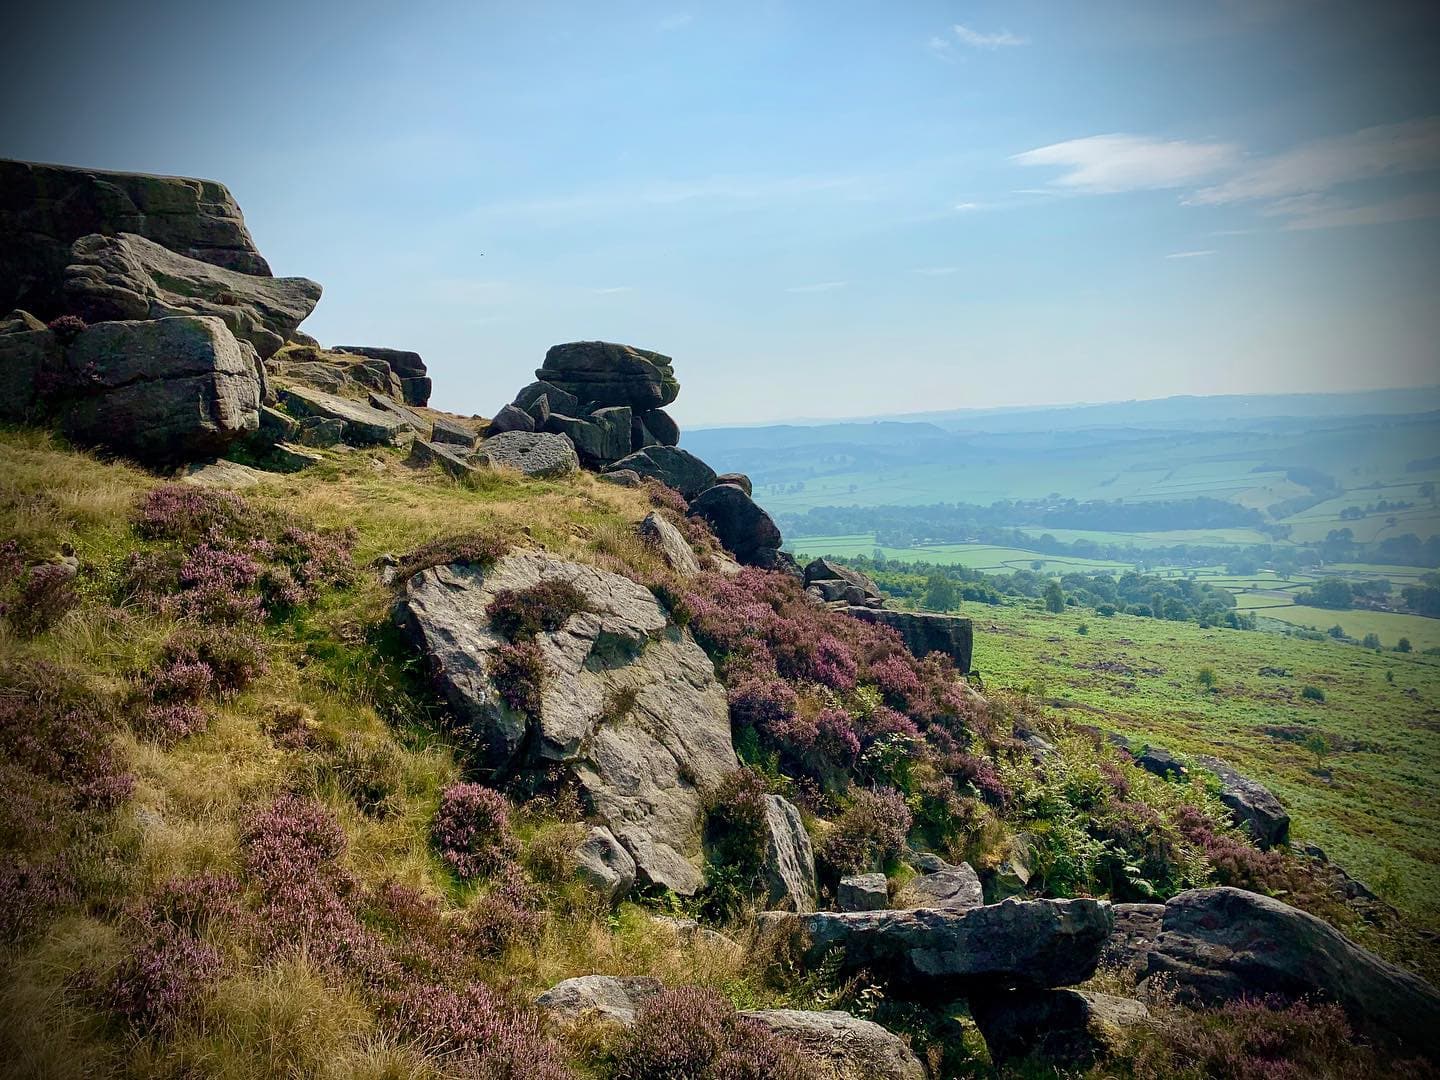 Less than a week to this year’s Peak District Challenge, don’t forget to give us a follow and che...